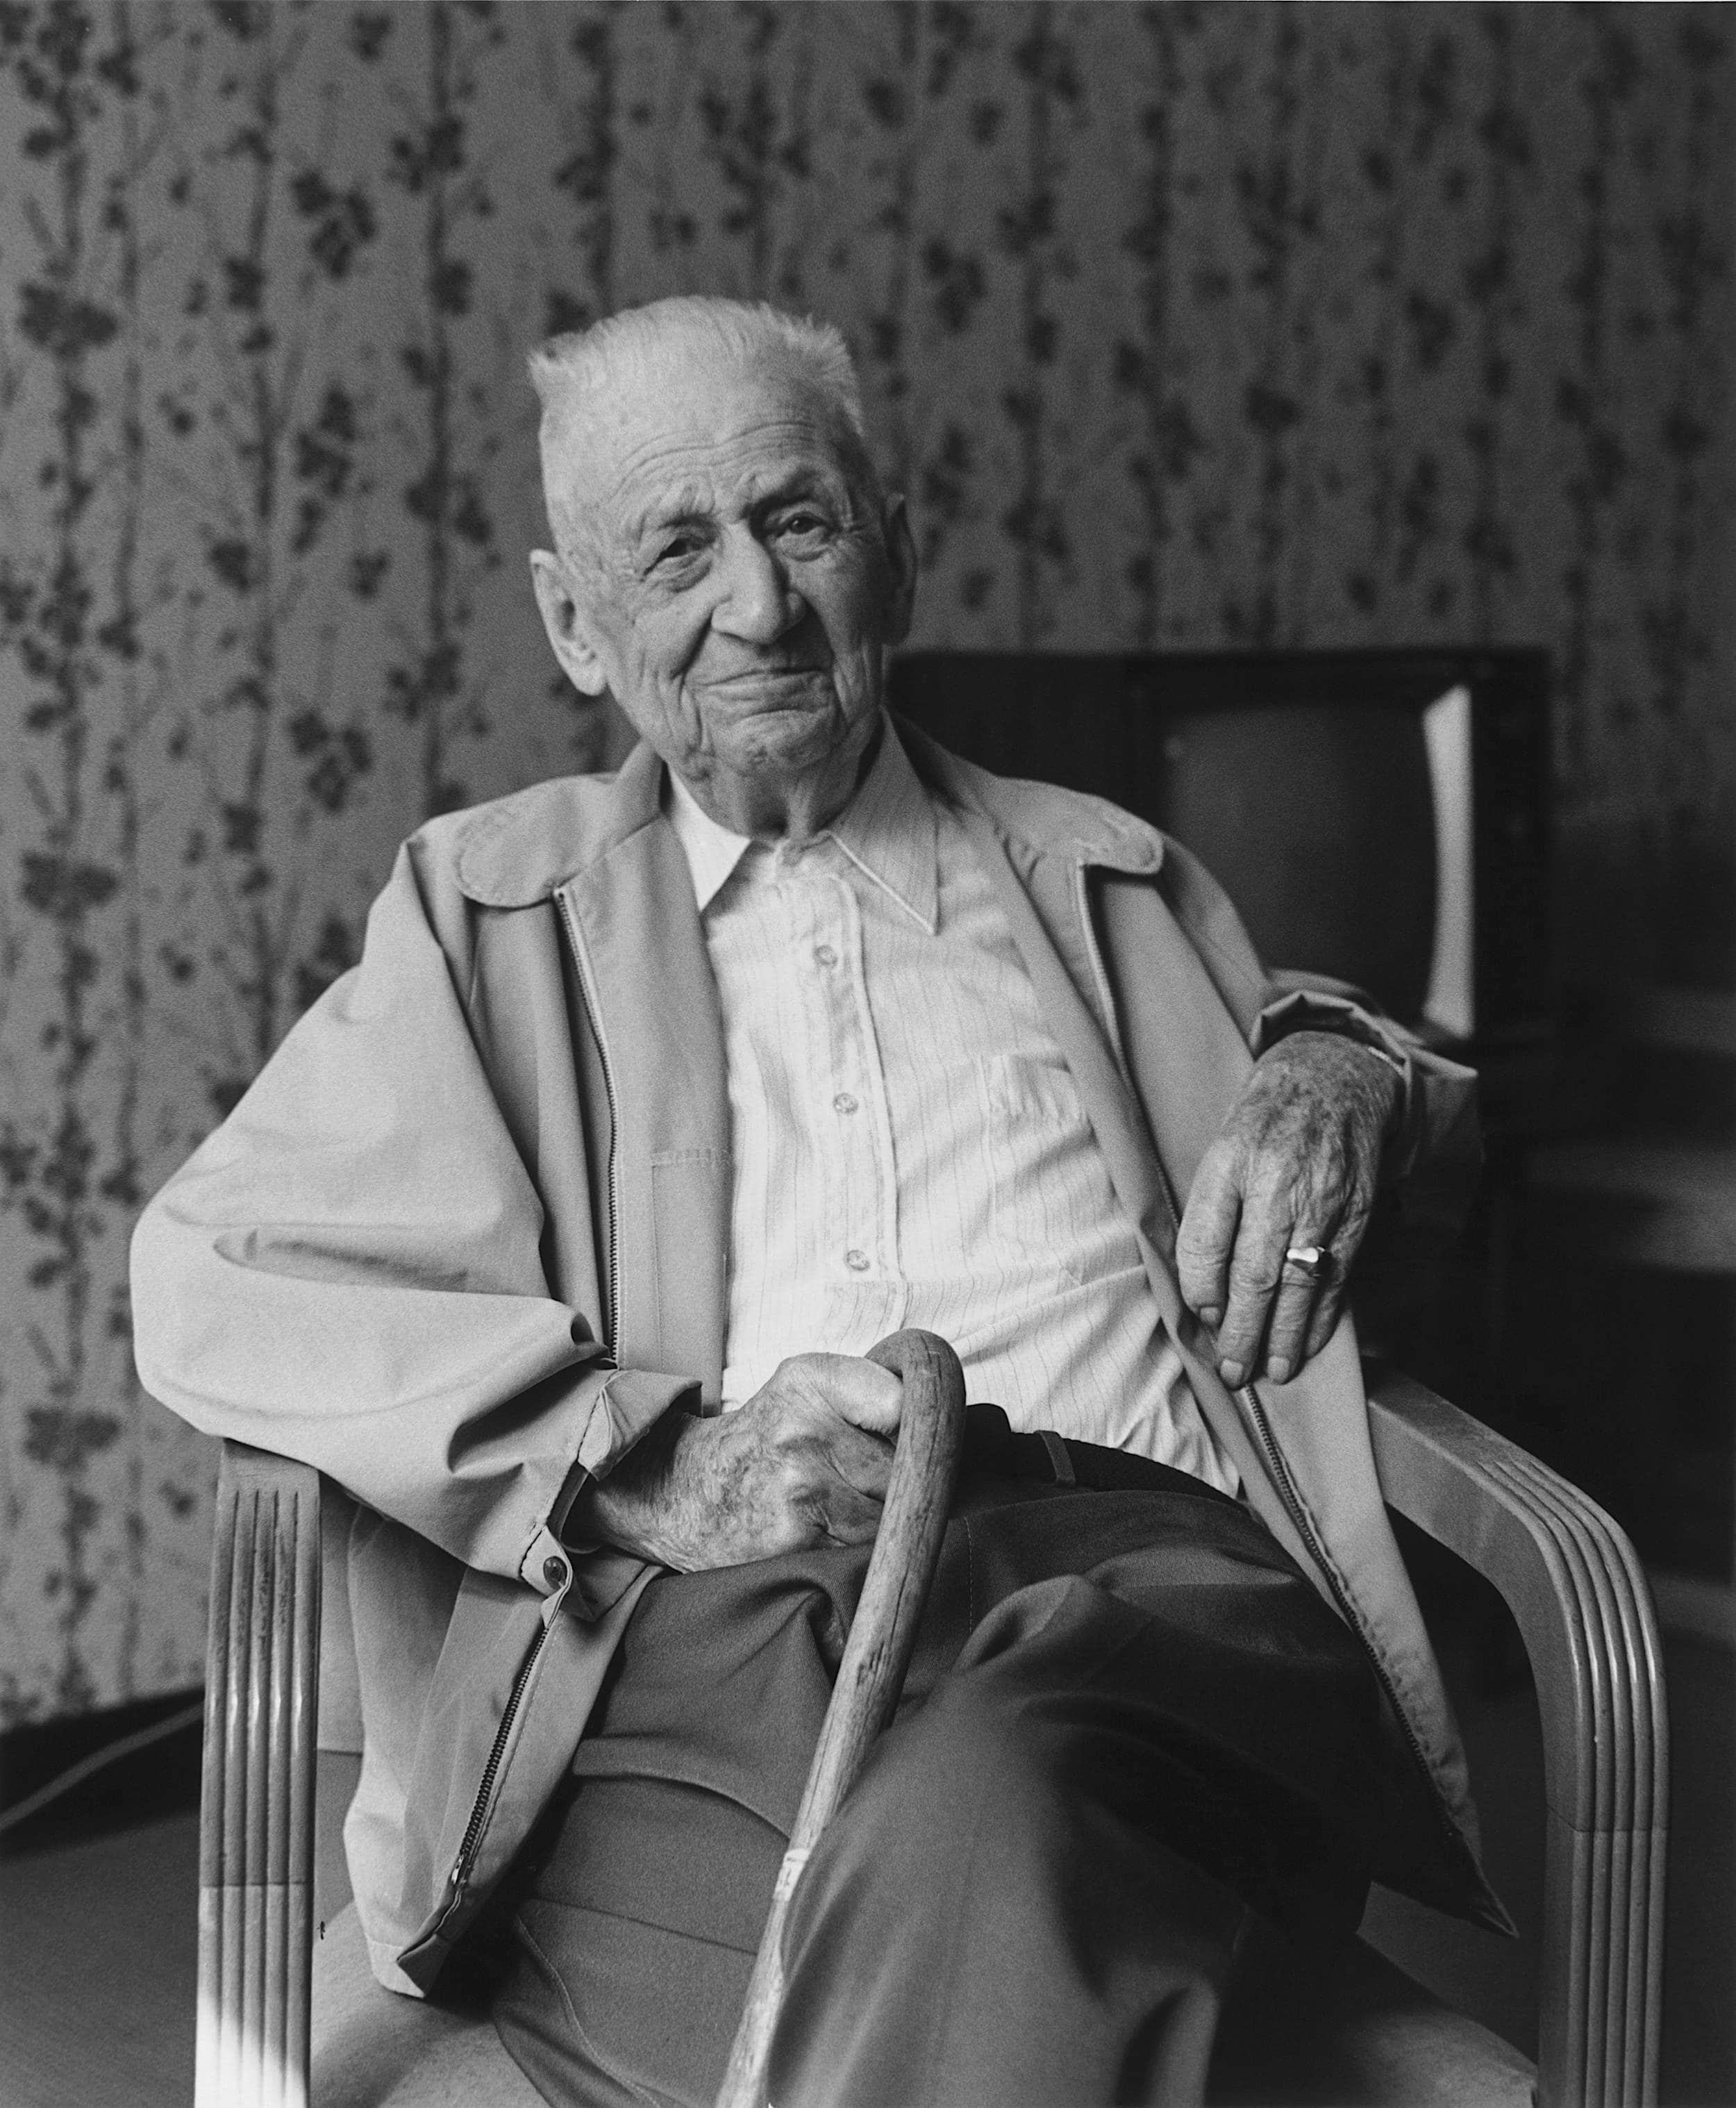 Black and white photo of elderly man seated holding cane in right hand over his lap.